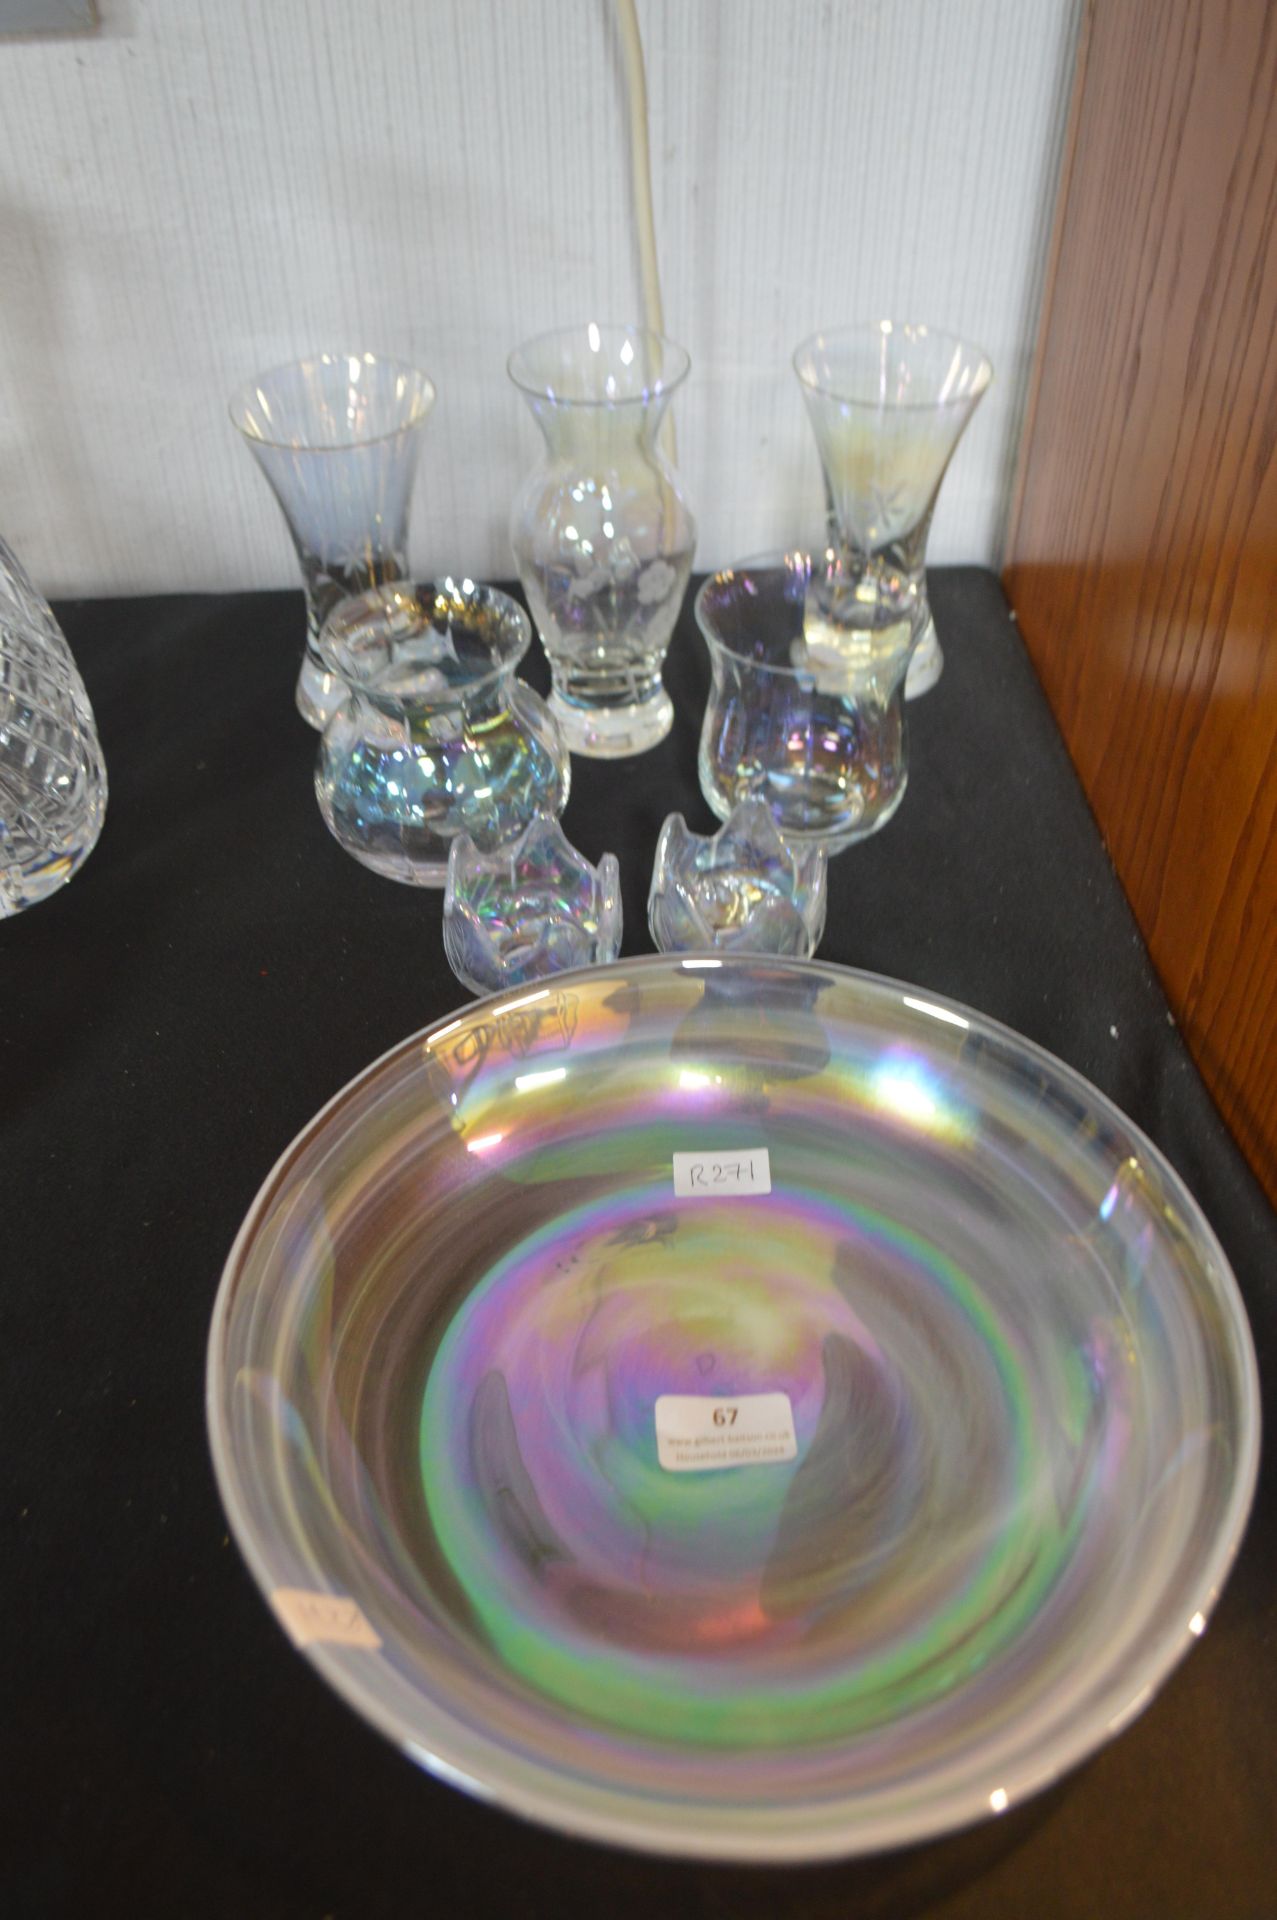 Iridescent Glass Bowl and Small Vases, etc.